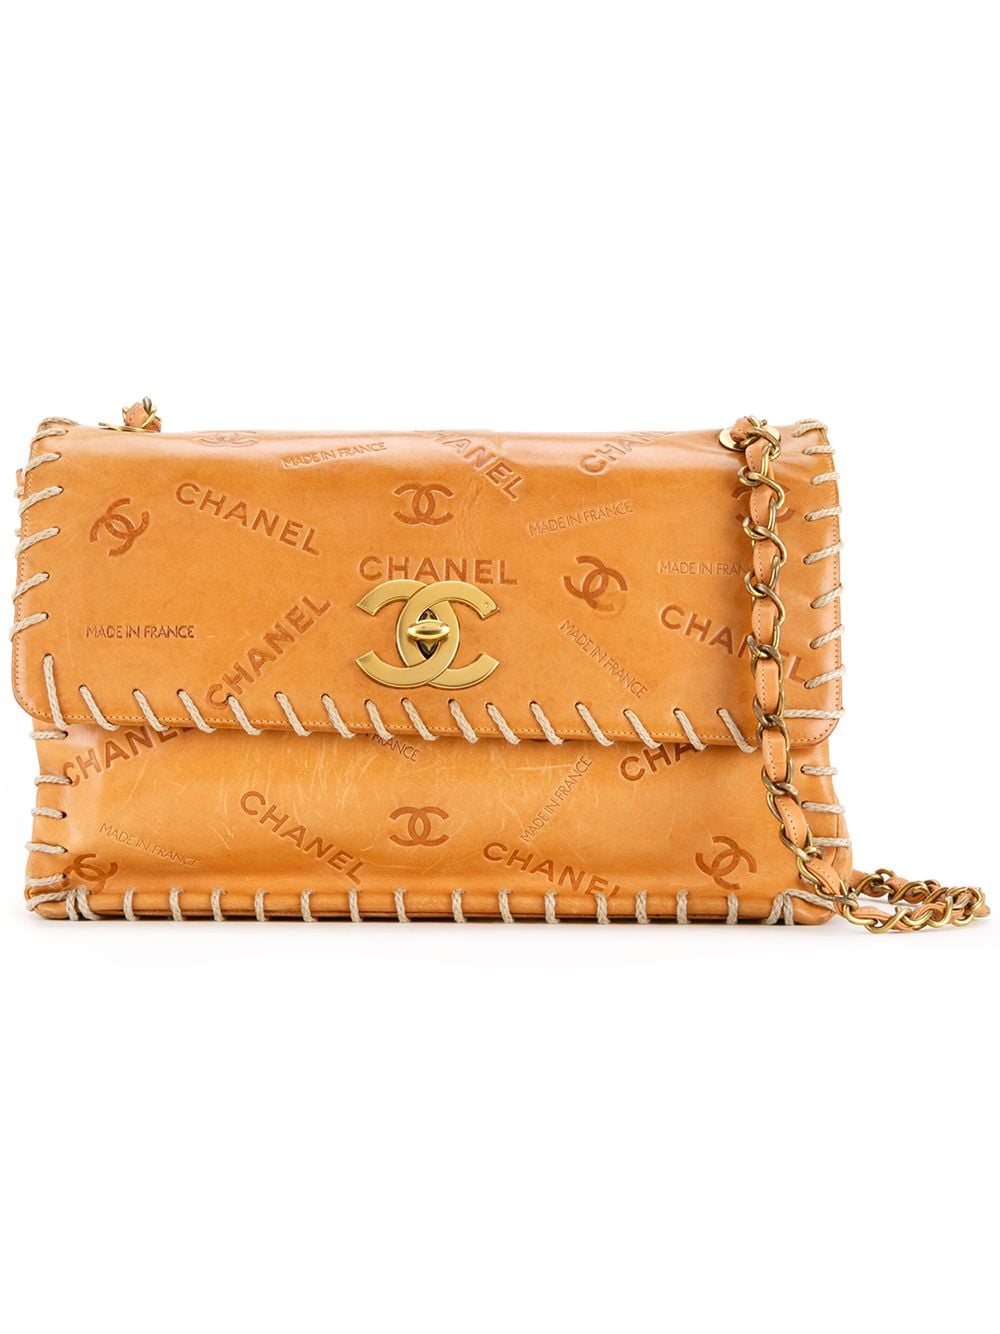 CHANEL Pre-Owned Whipstitch Flap Bag - Farfetch